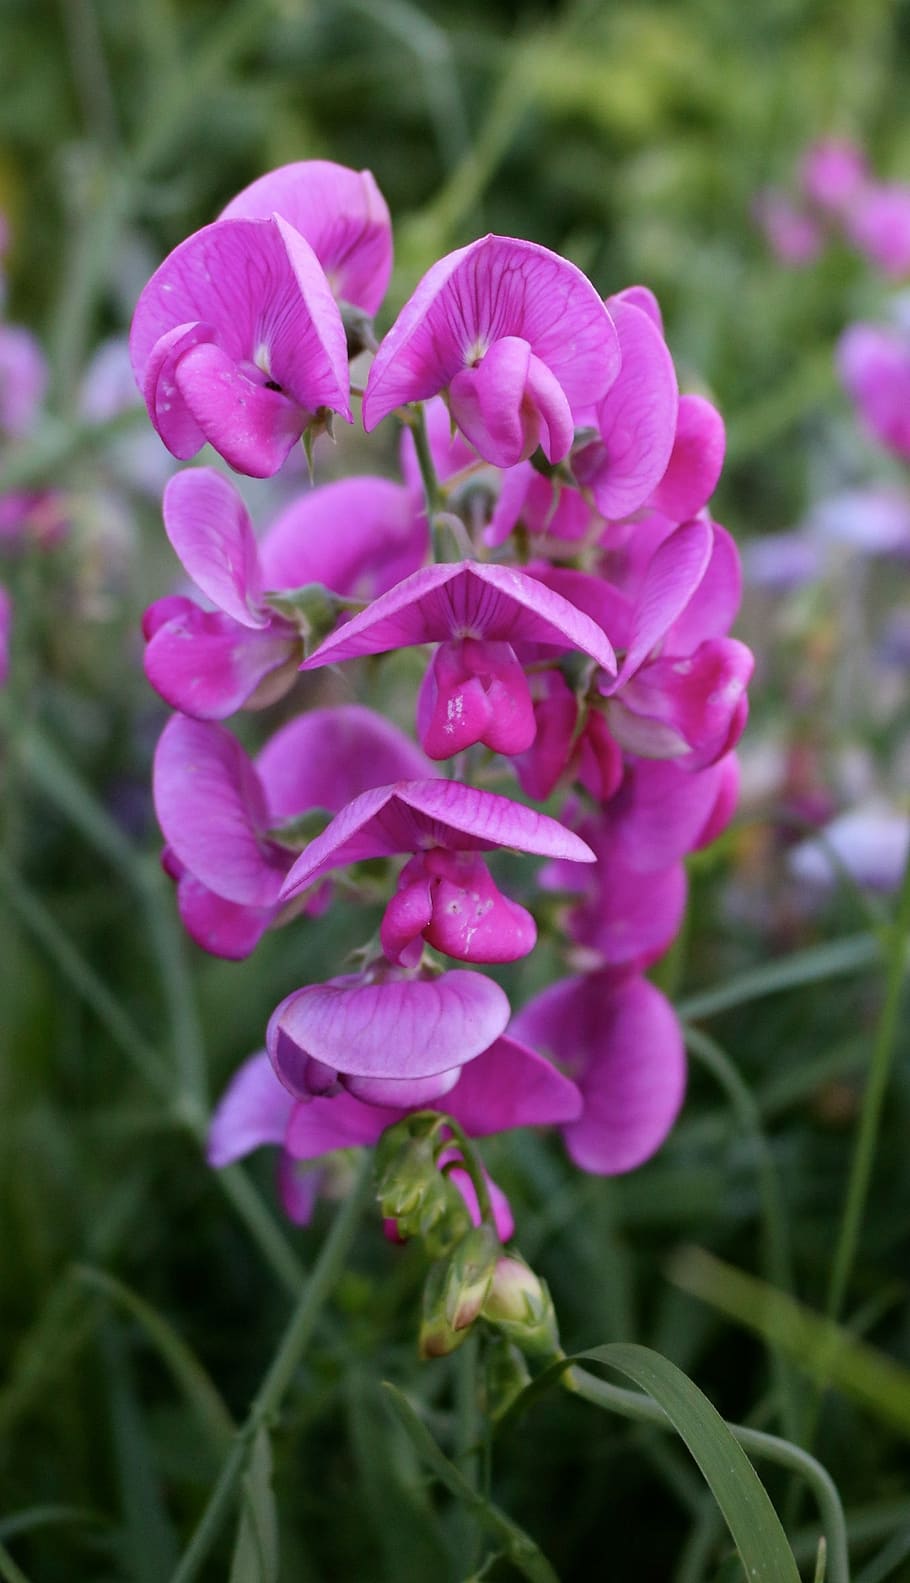 sweetpea flower, pink, sweetpea, decorative, colourful, spring, summer, lathers odorous, climbing plant, meadow